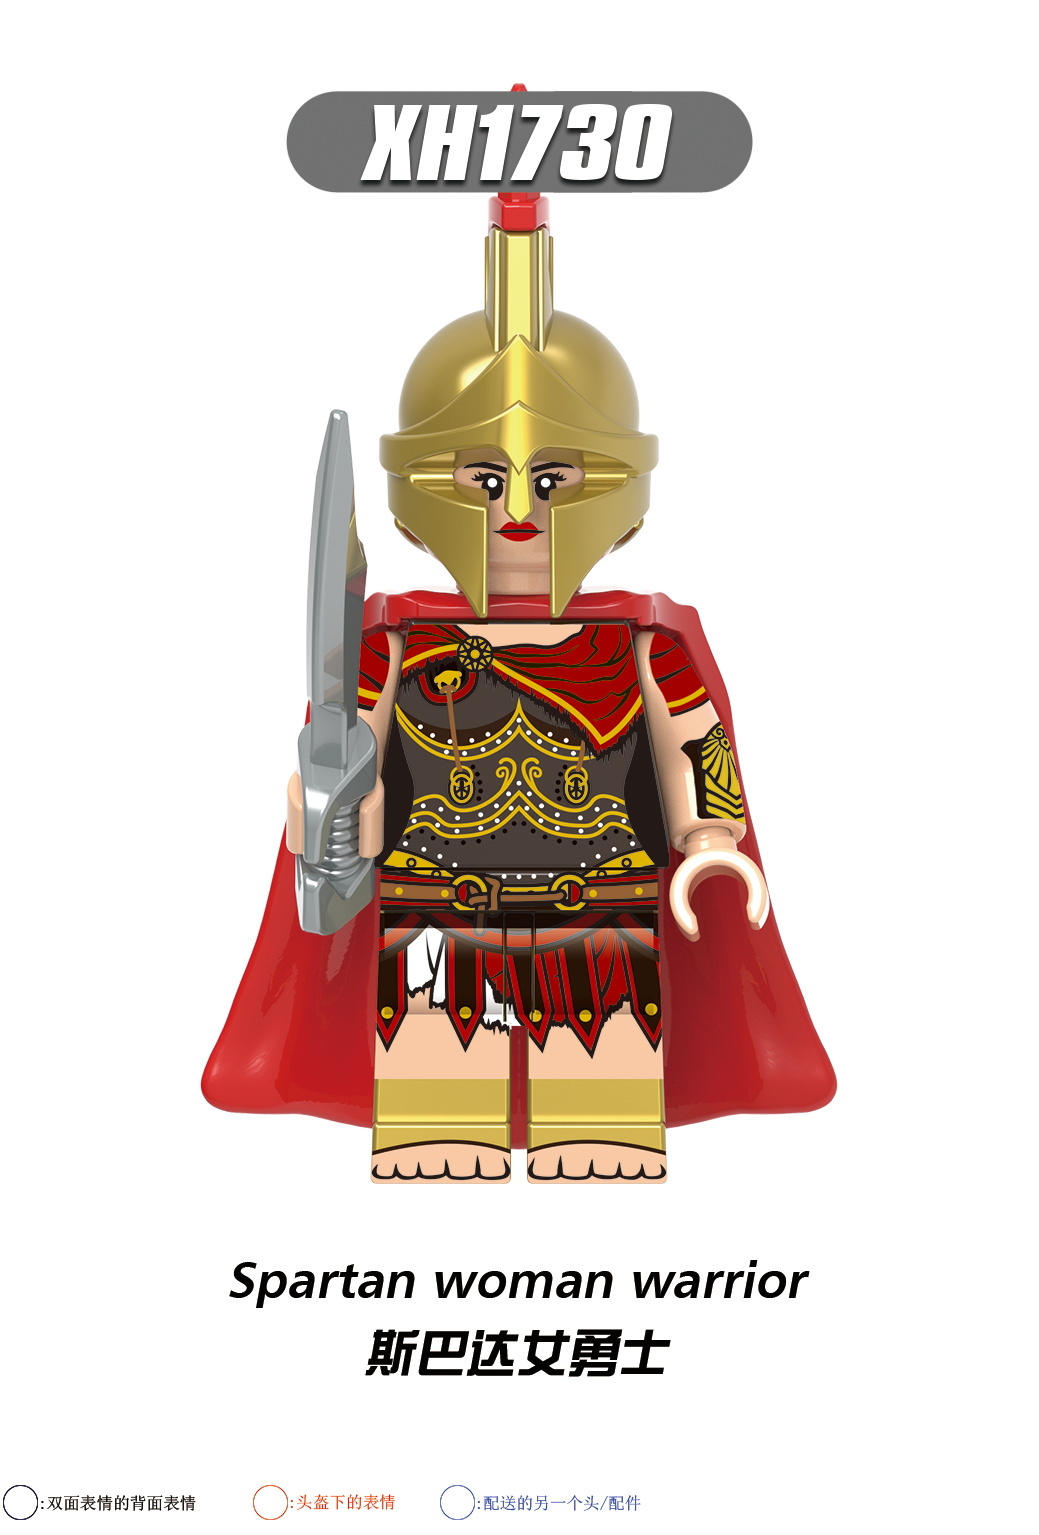 XH1730 1731 1732 1733 1734 1735 1736 1737 X0316 Building Blocks Roman Soldier Sparta Heroes Knigth Woman Warrior Bricks Educational Toys for Kids Gifts 